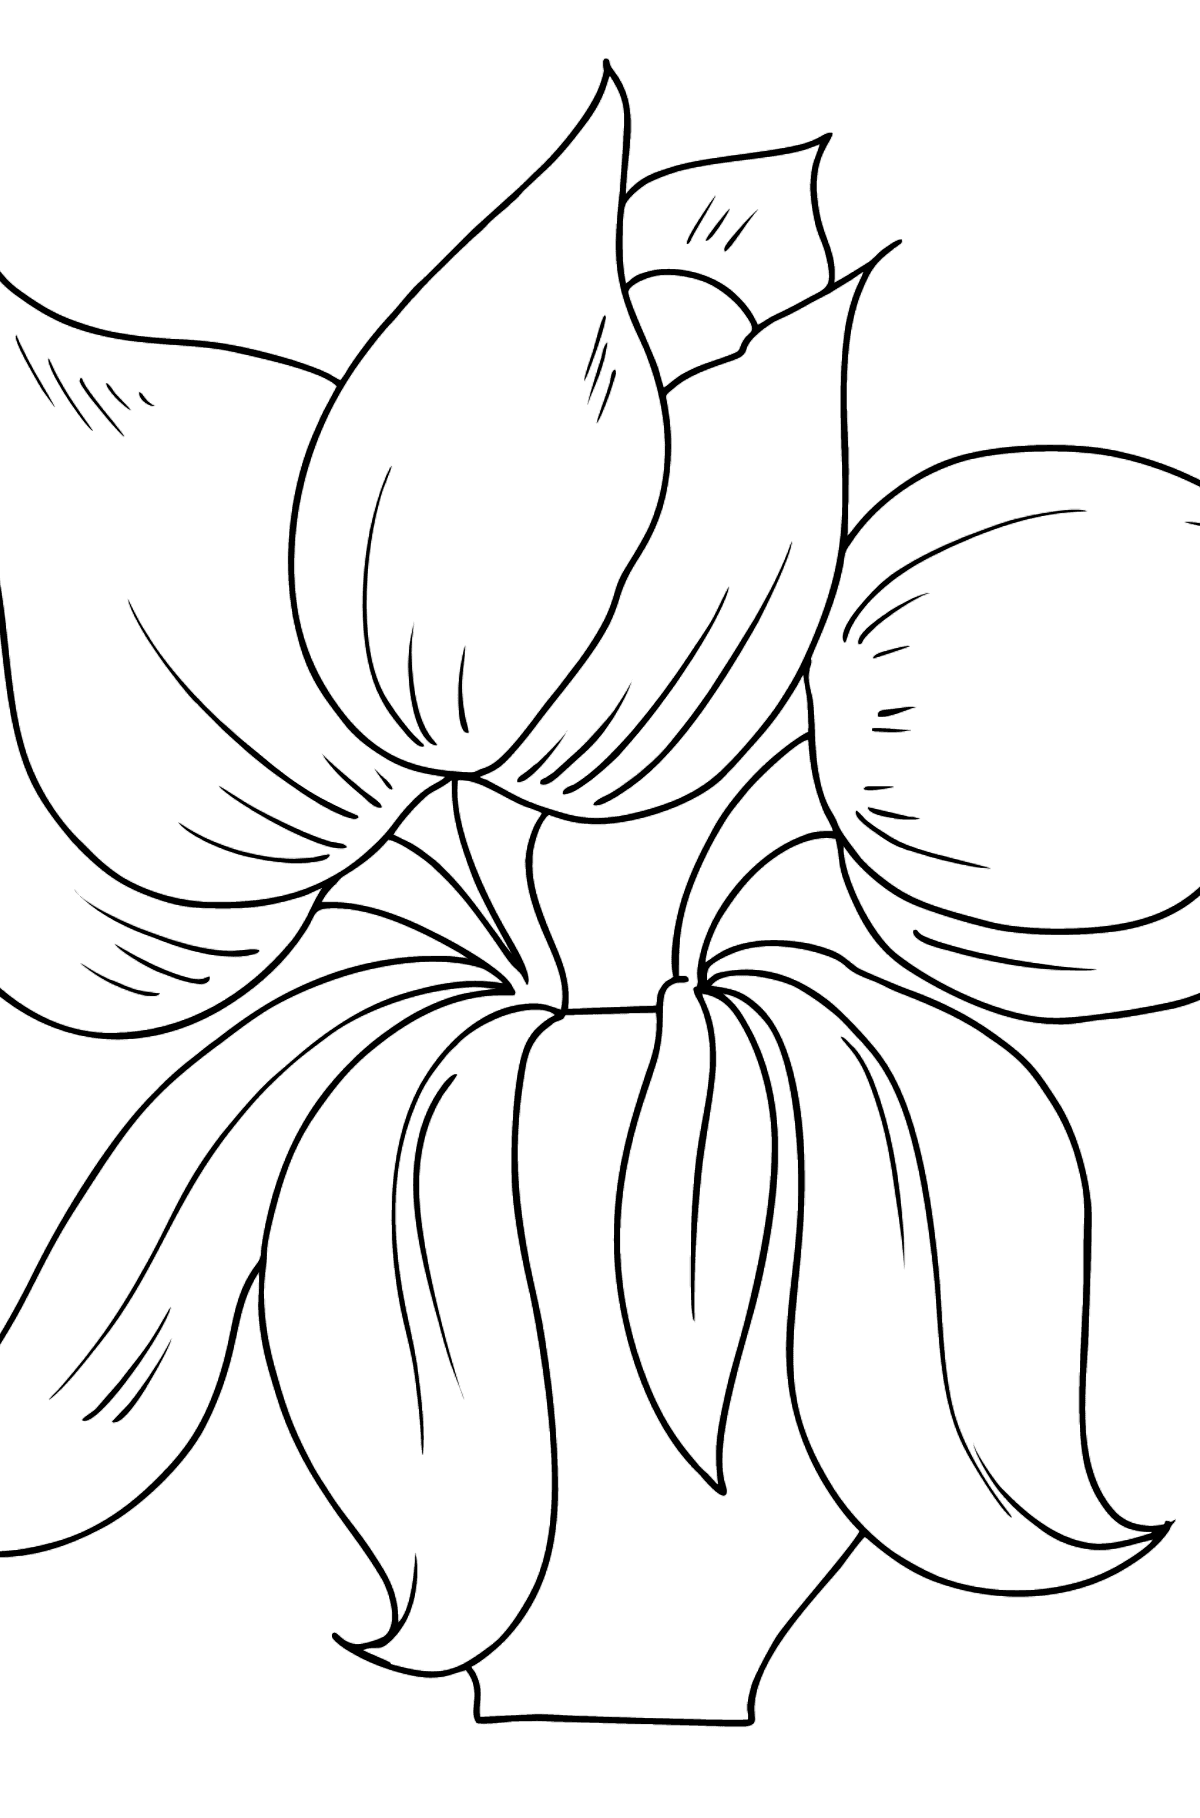 Flower Coloring Page - Tulips - Coloring Pages for Kids